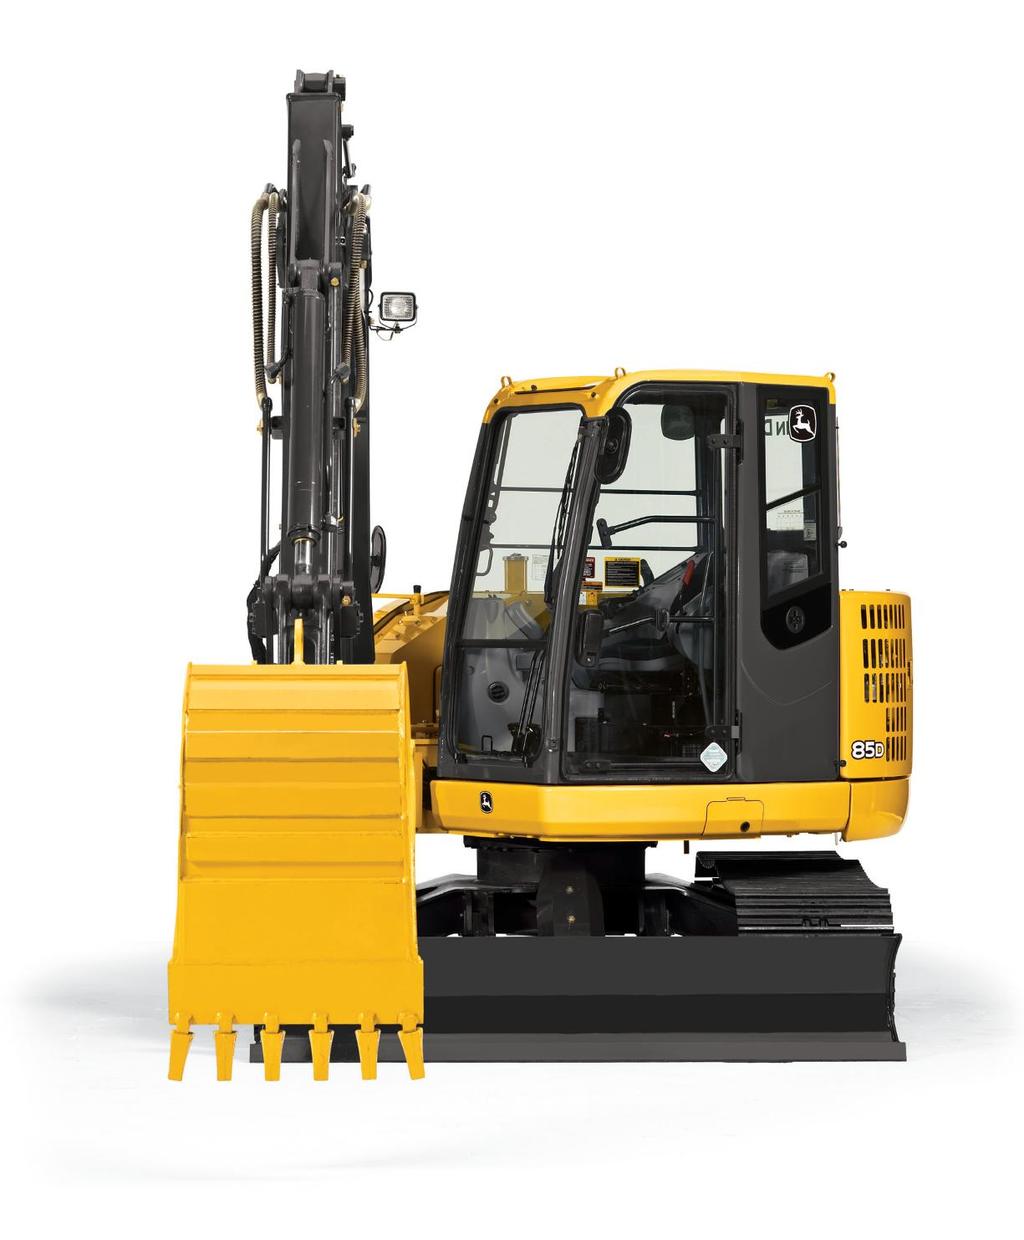 Reduced tail swing allows operators to get closer to objects on congested jobsites, for extra versatility and maneuverability in close quarters.